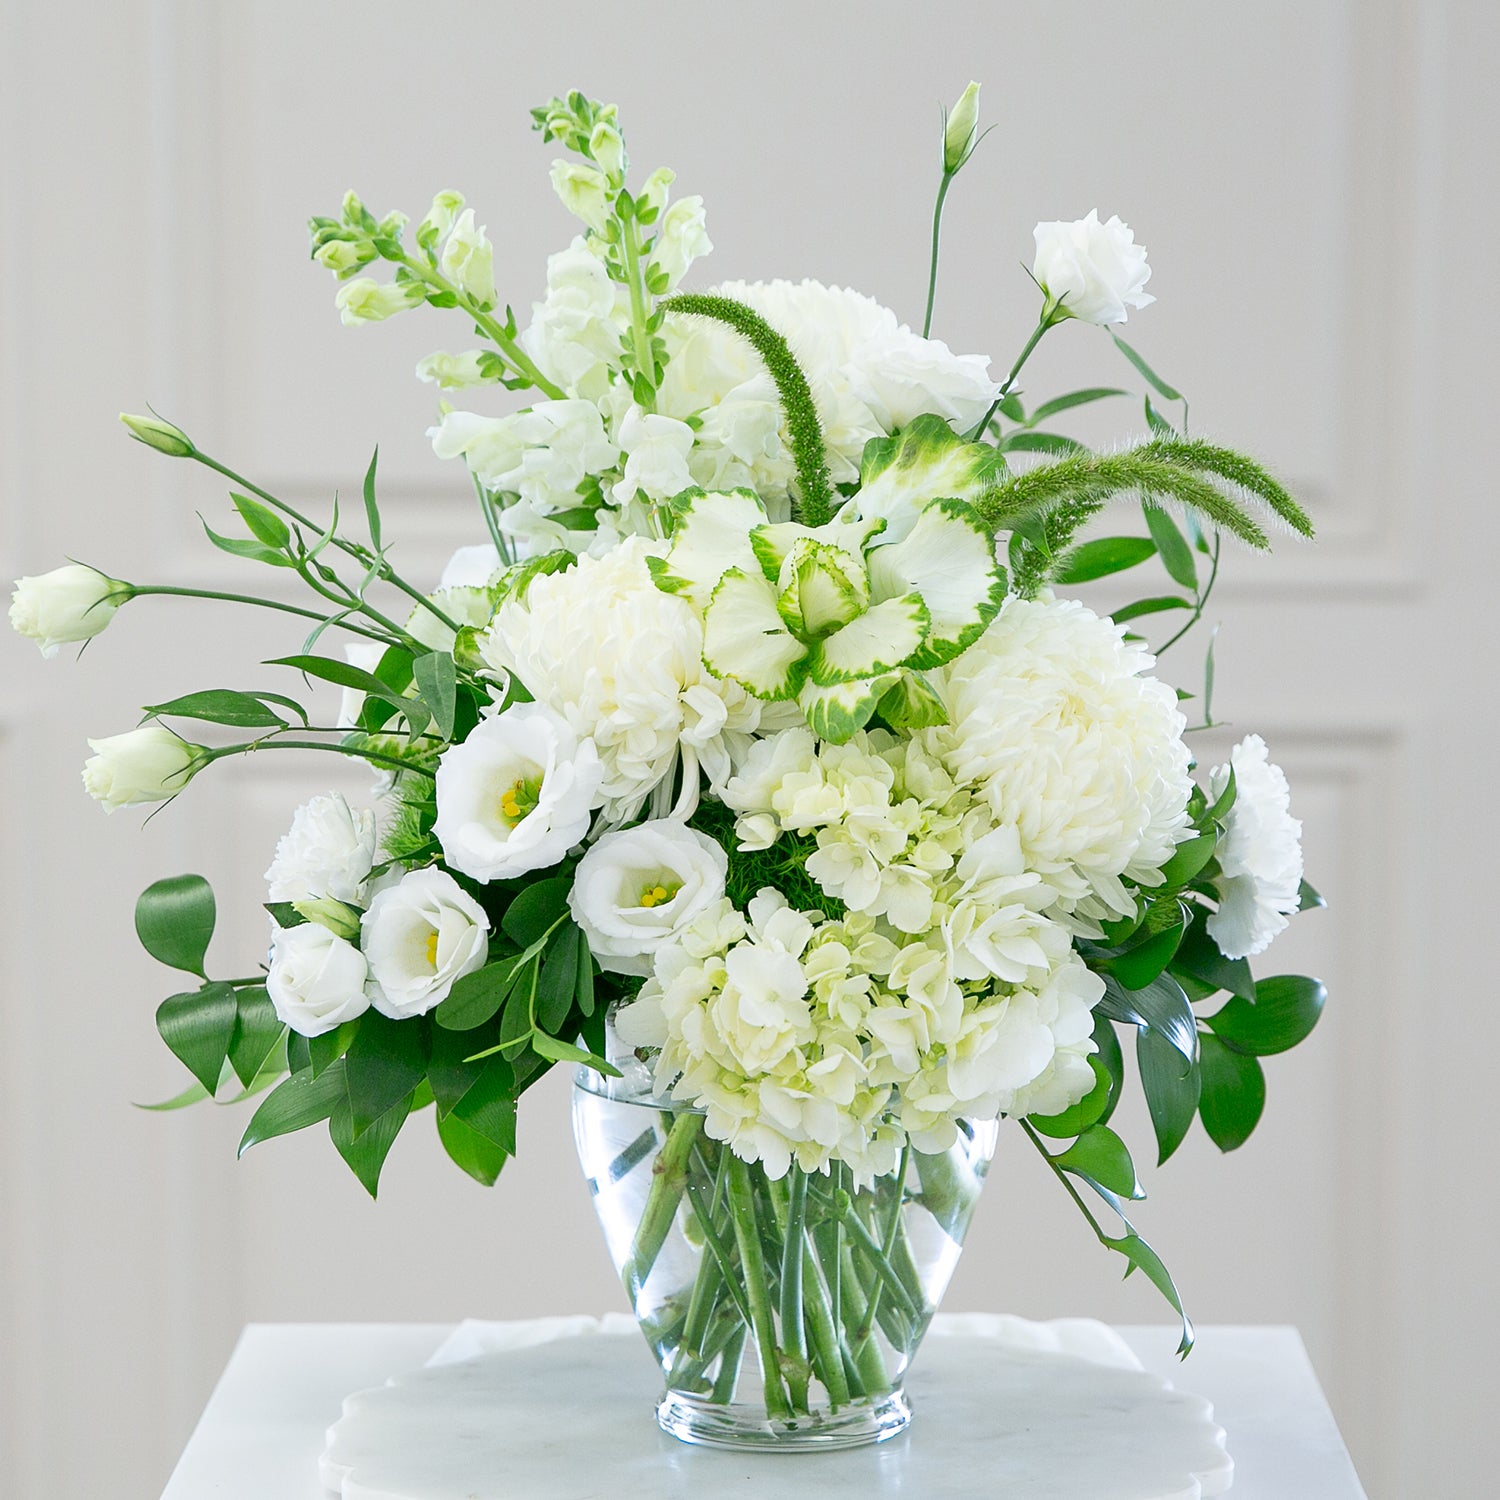 A 5 3/4 inch Serenity vase filled with an all-white floral arrangement, including lush peonies, delicate lisianthus, hydrangeas, and ornamental greenery, displayed on a marble tabletop with a blurred light interior background.